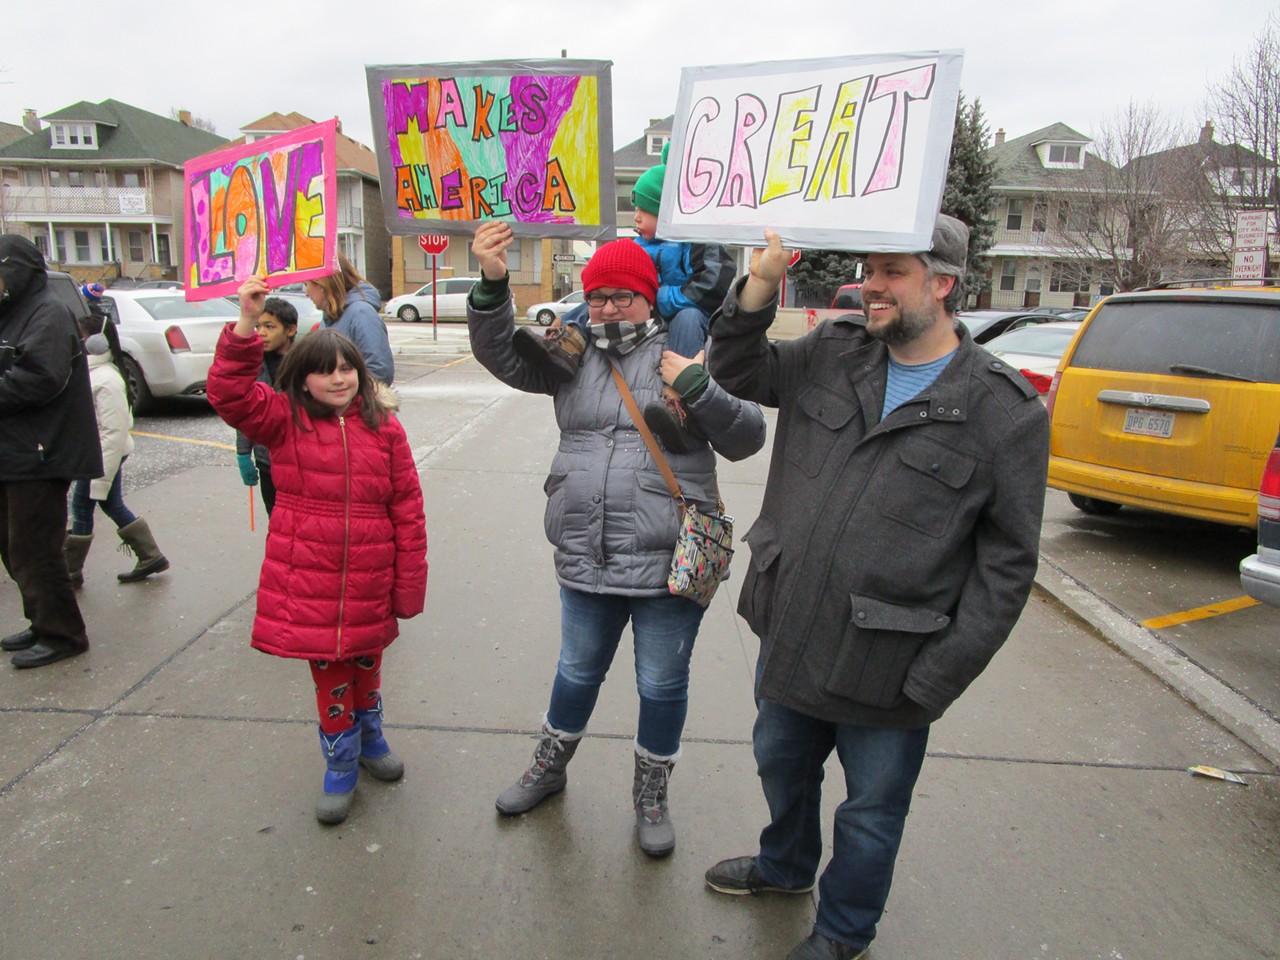 45 amazing photos from the Hamtramck Muslim Ban protest